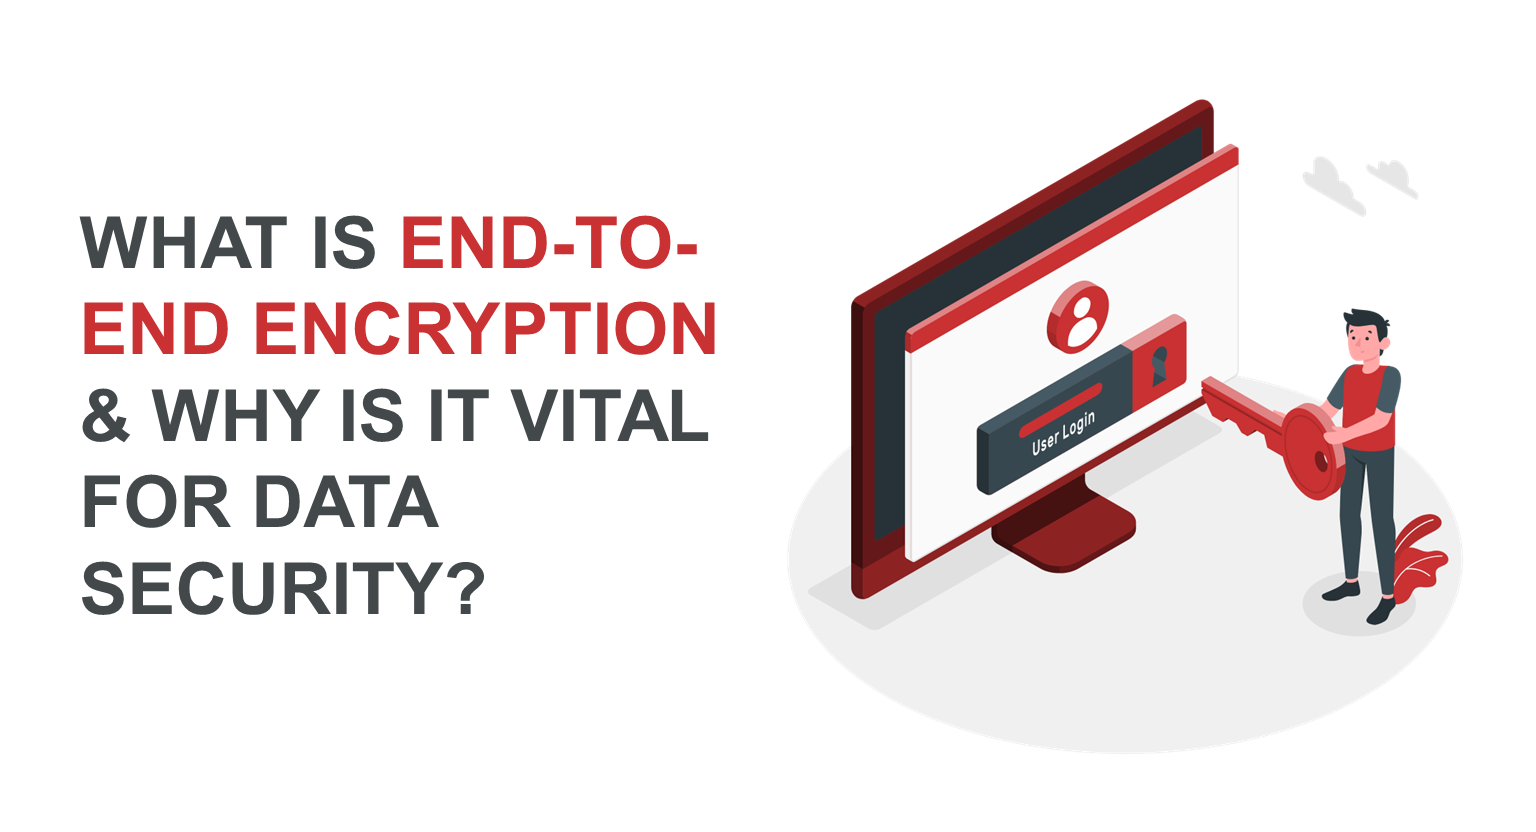 What is End-to-End Encryption and Why is it Vital for Data Security?